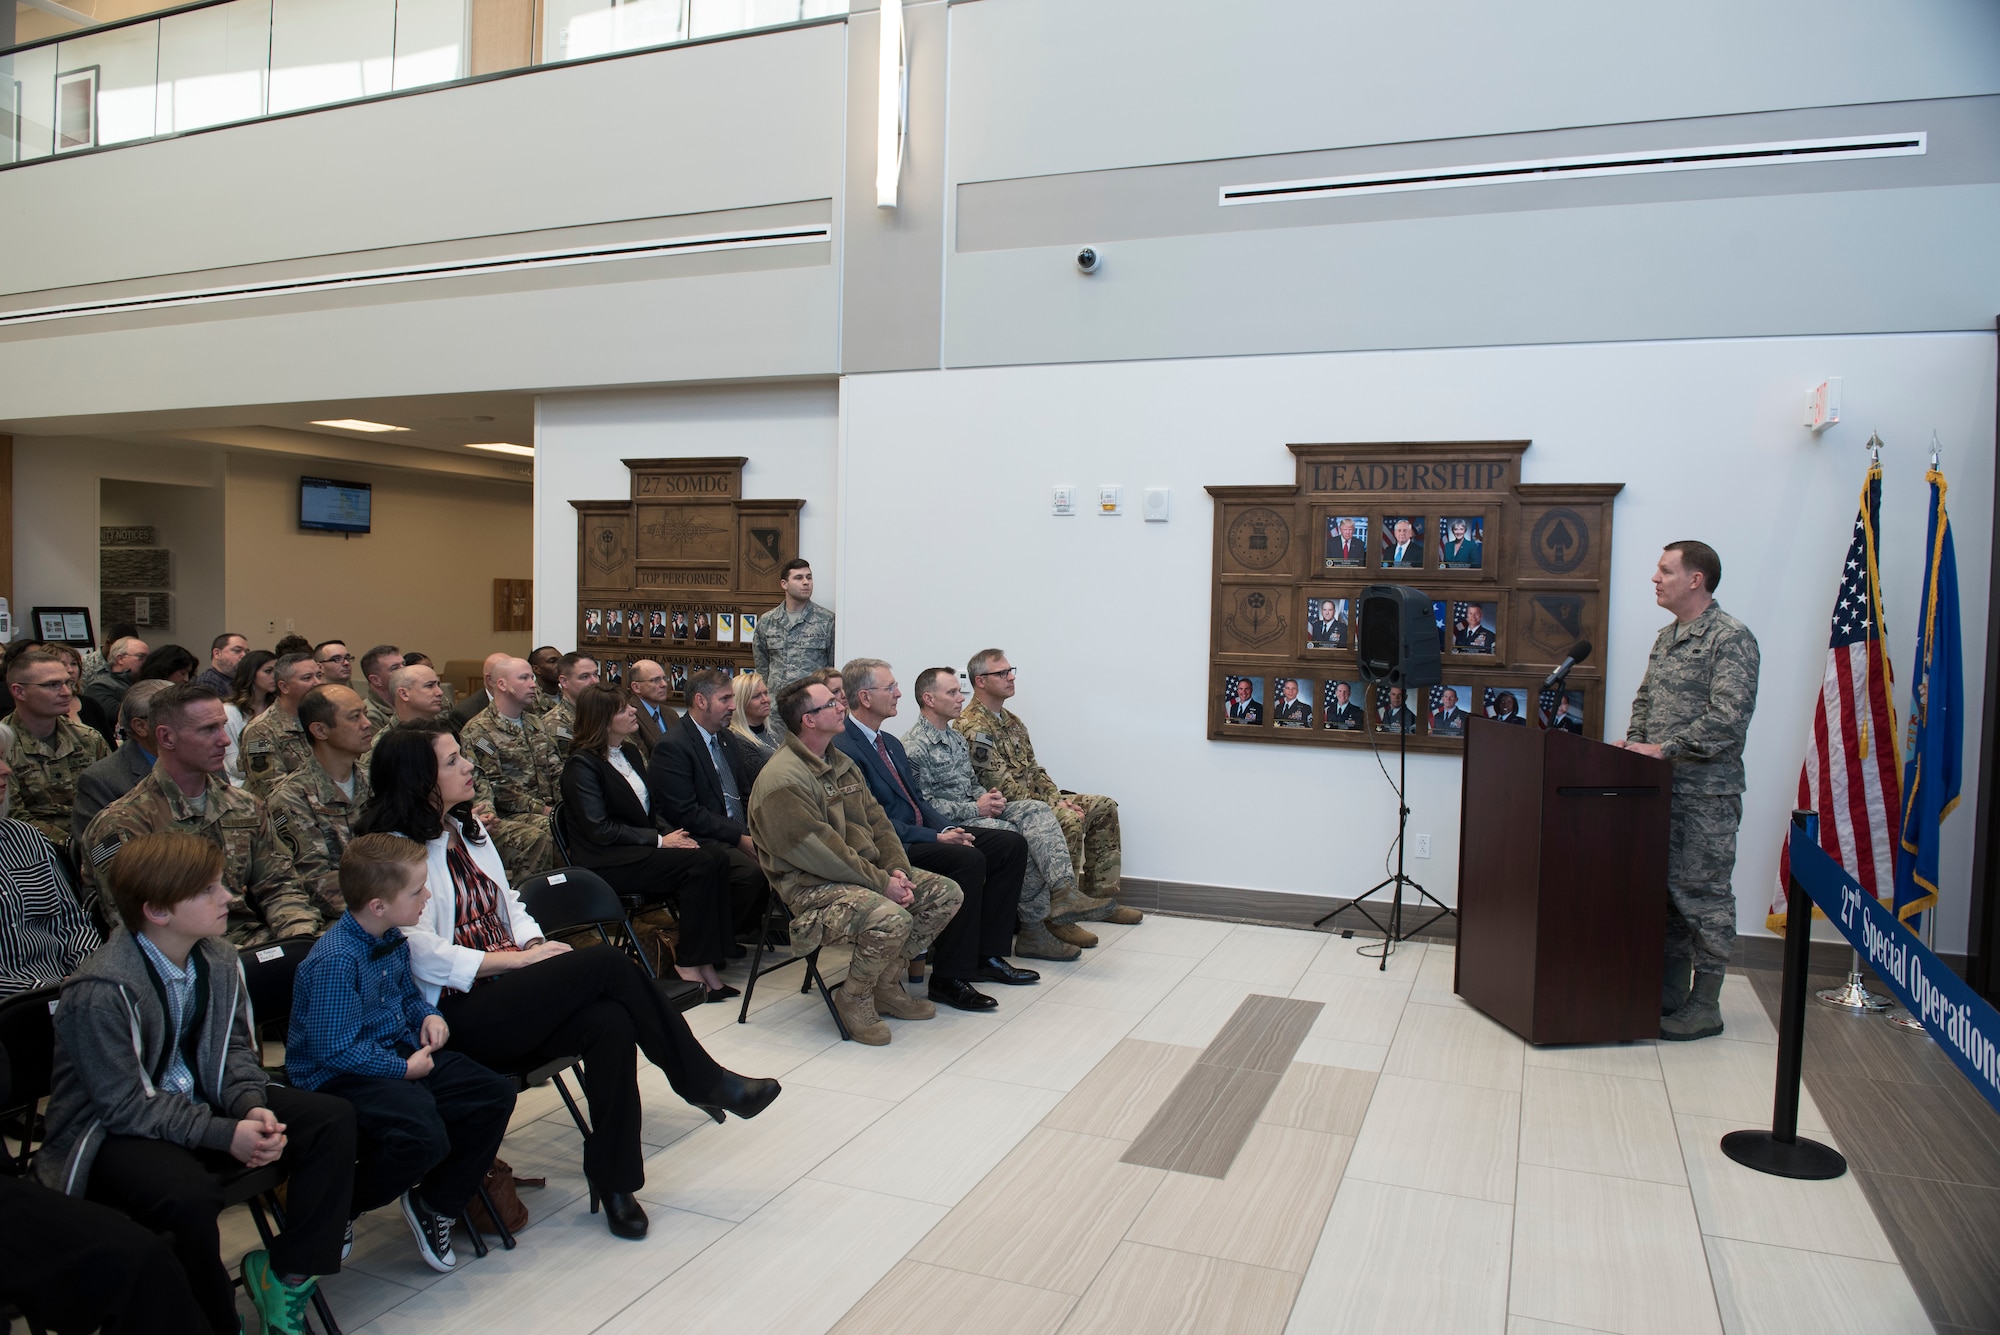 Col. Christopher Patrick, 27th Special Operations Medical Group commander, delivers remarks during the 27th SOMDG building ribbon cutting ceremony at Cannon AFB, N.M., Feb. 23, 2018. The layout of the new building was designed with patients in mind. Physical therapy and the pharmacy, both high-traffic areas, are located near the main entrance. (U.S. Air Force photo by Staff Sgt. Michael Washburn/Released)